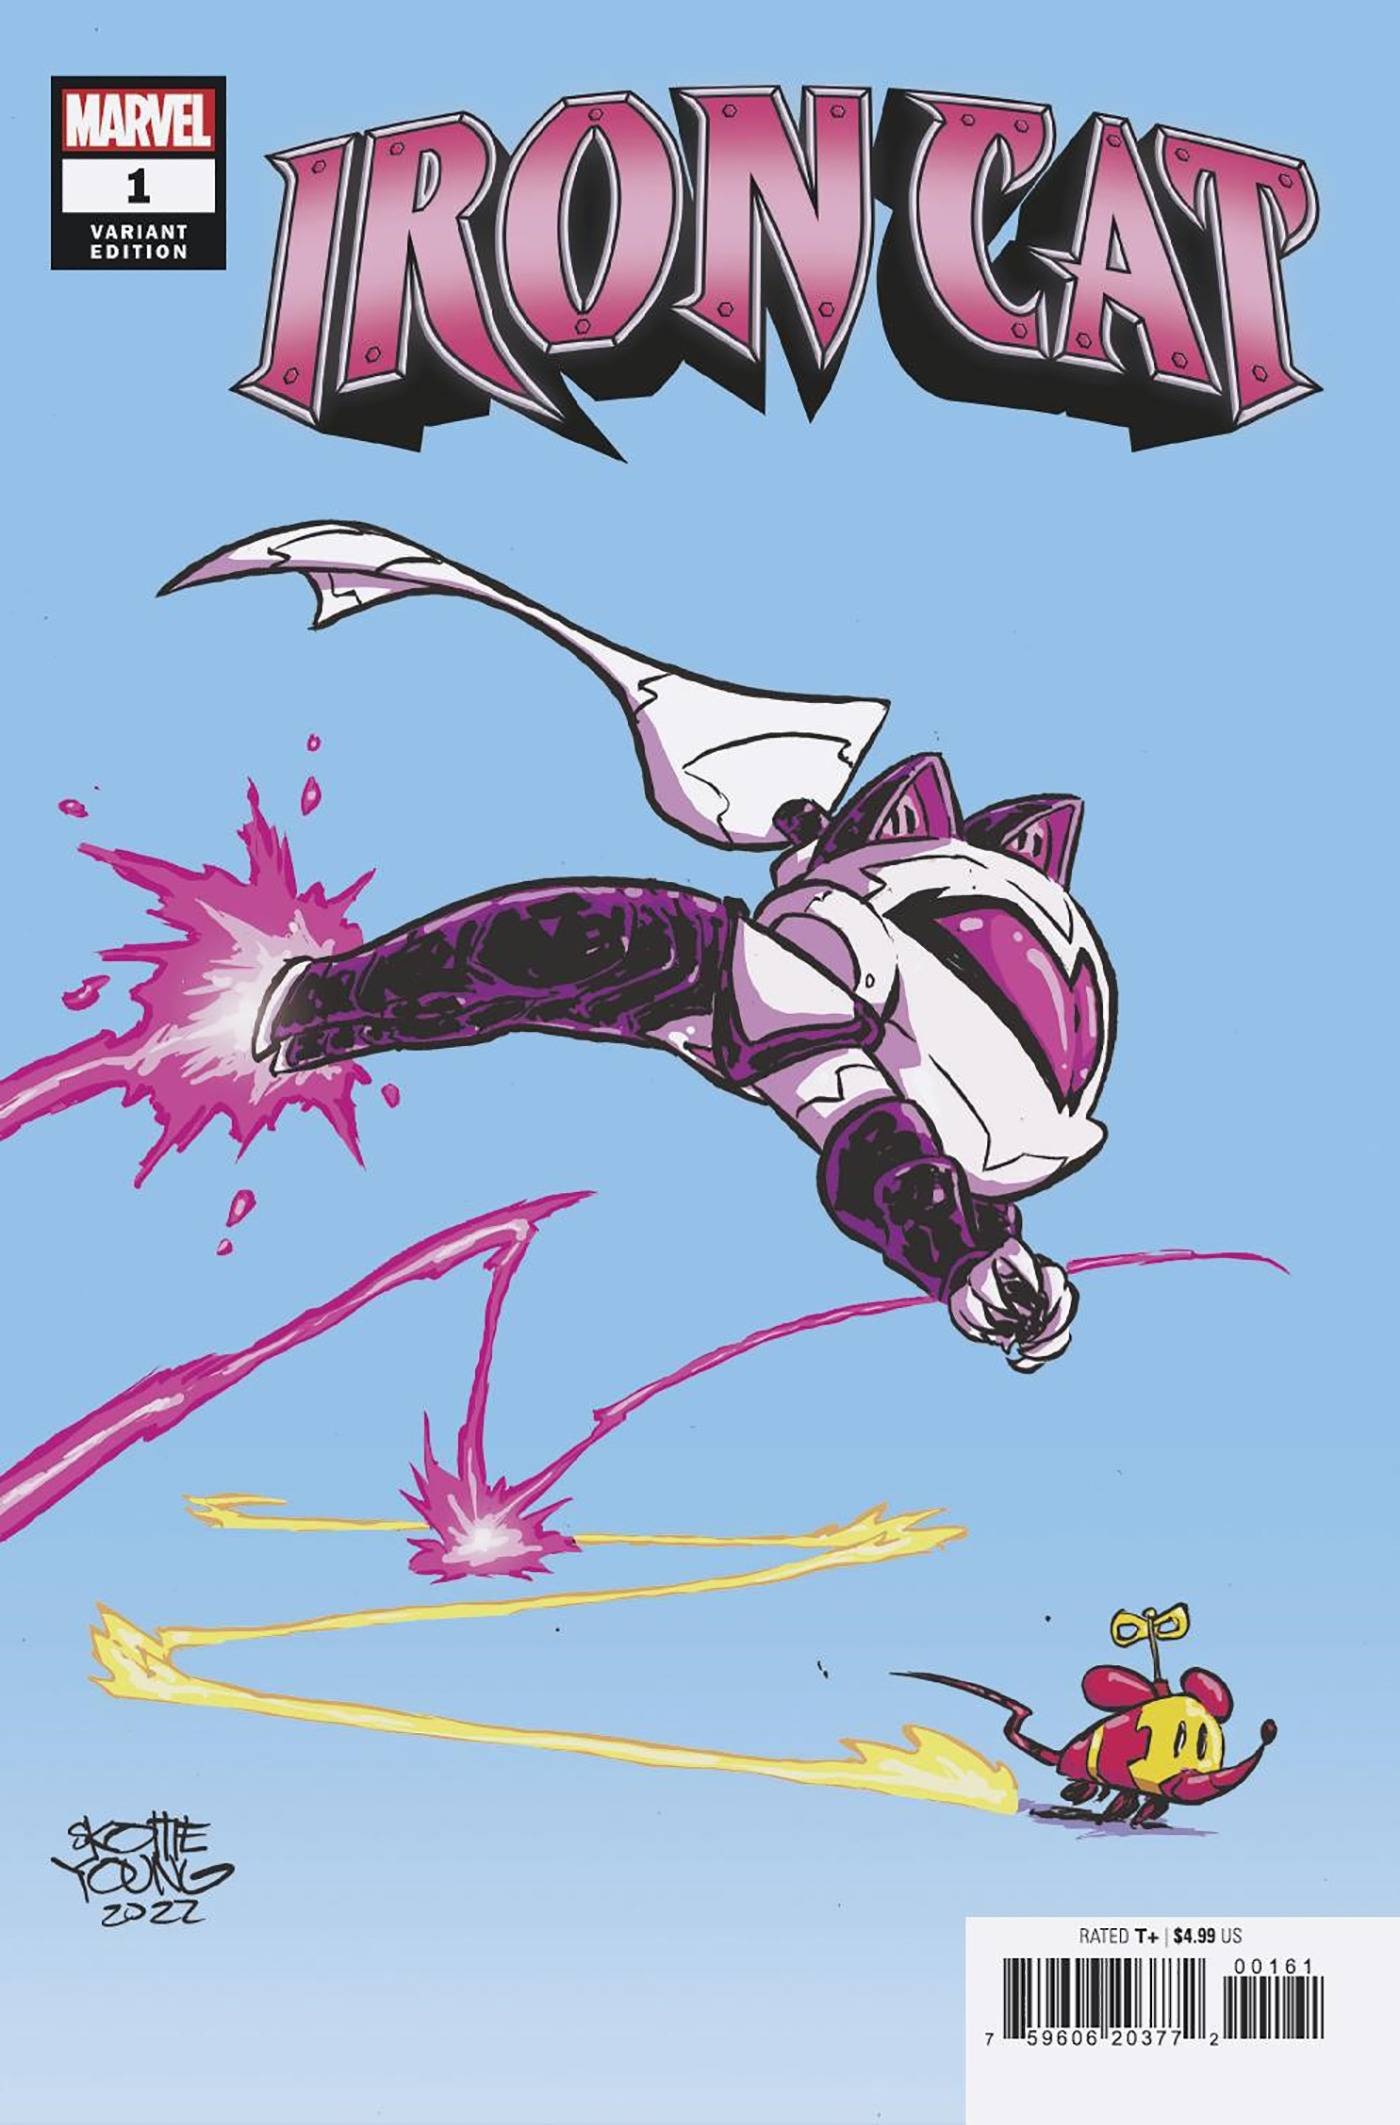 06/29/2022 IRON CAT #1 (OF 5) YOUNG VARIANT